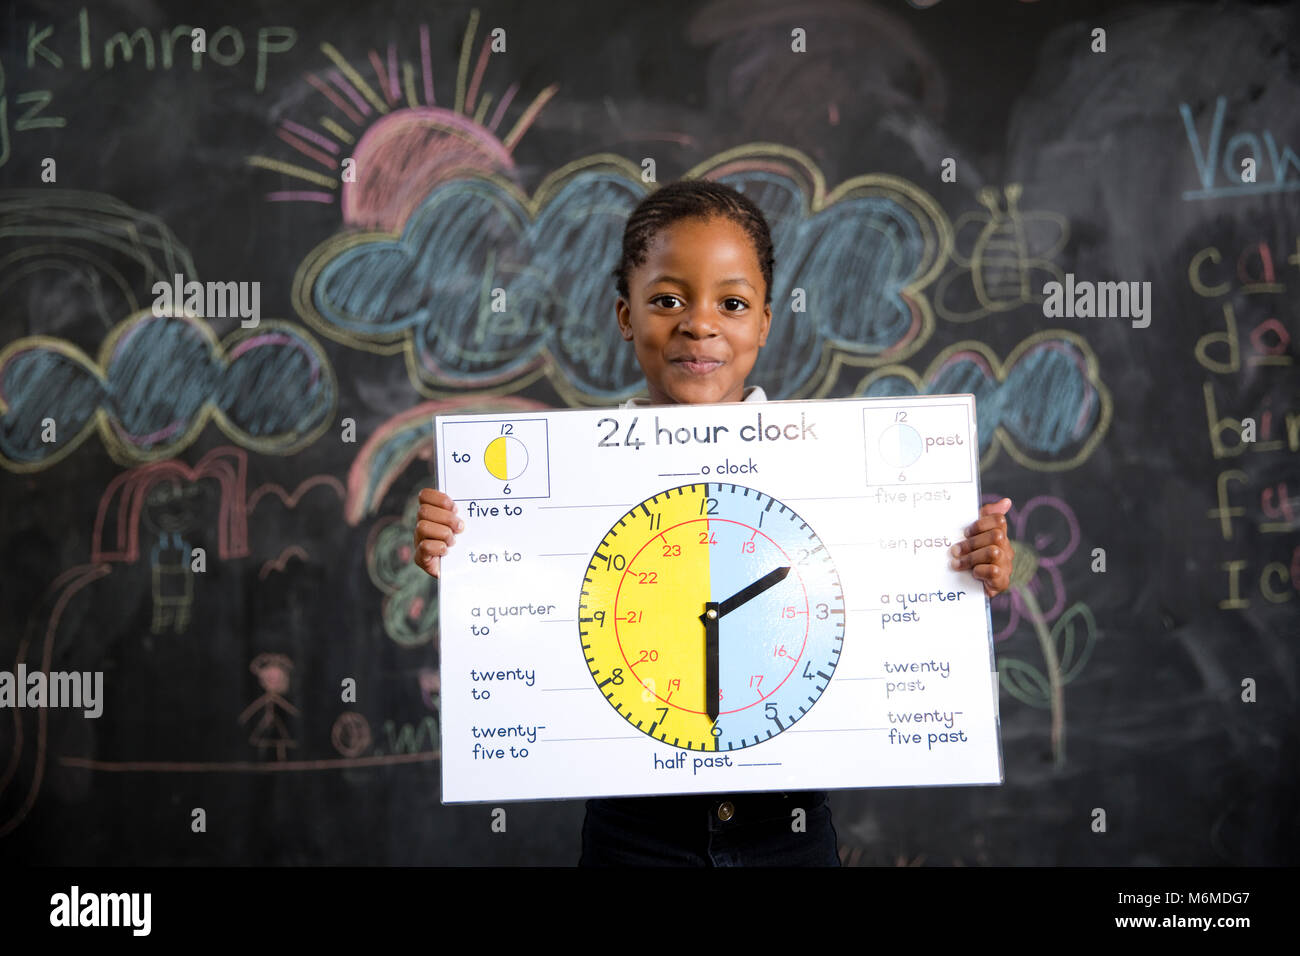 School girl holding a clock Banque D'Images